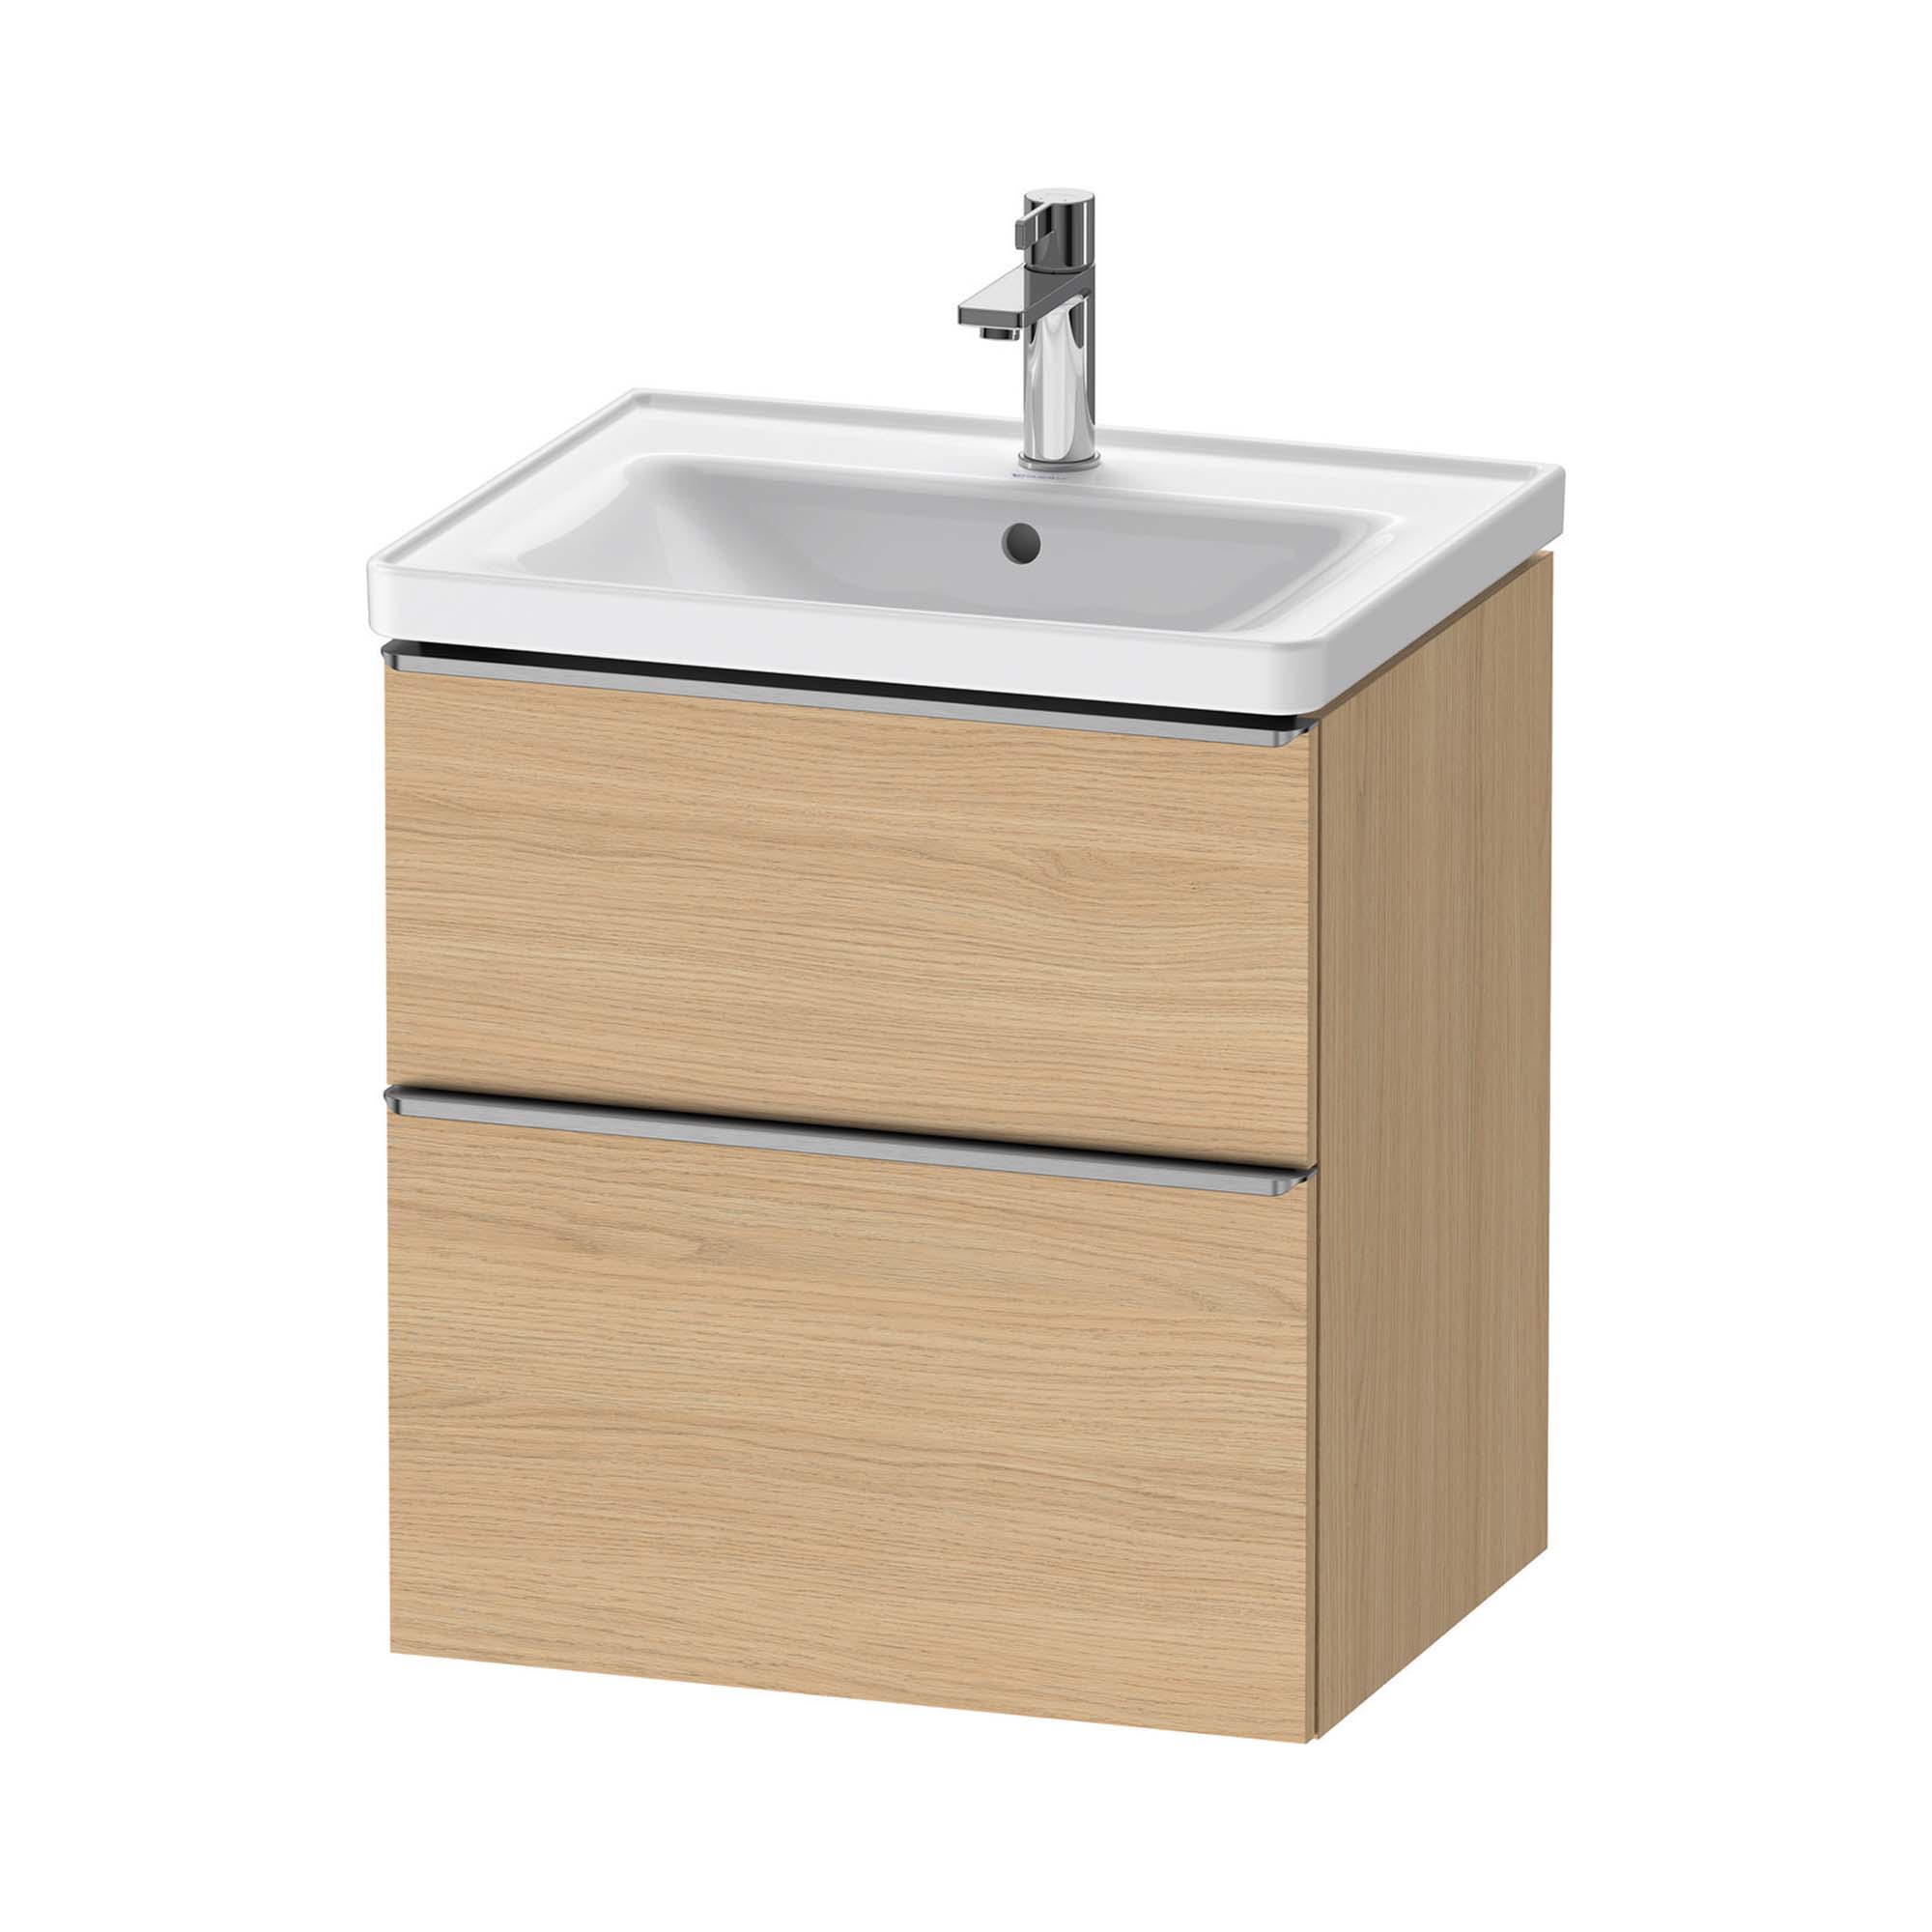 duravit d-neo 600 wall mounted vanity unit with d-neo basin natural oak stainless steel handles